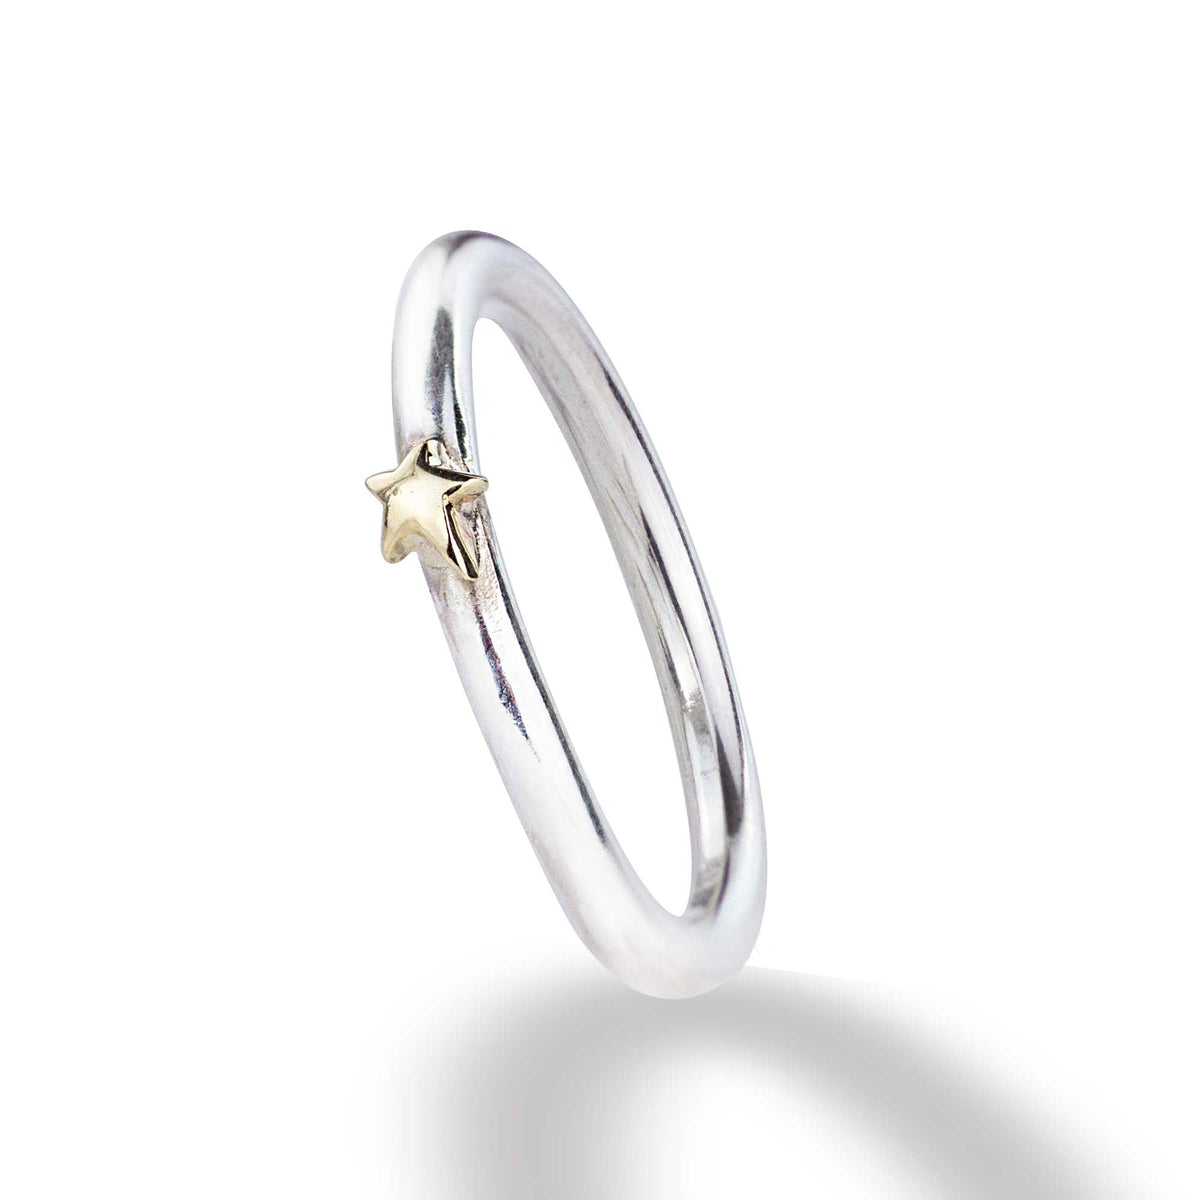 Everyday silver stacking ring with solid gold star scarlett jewellery